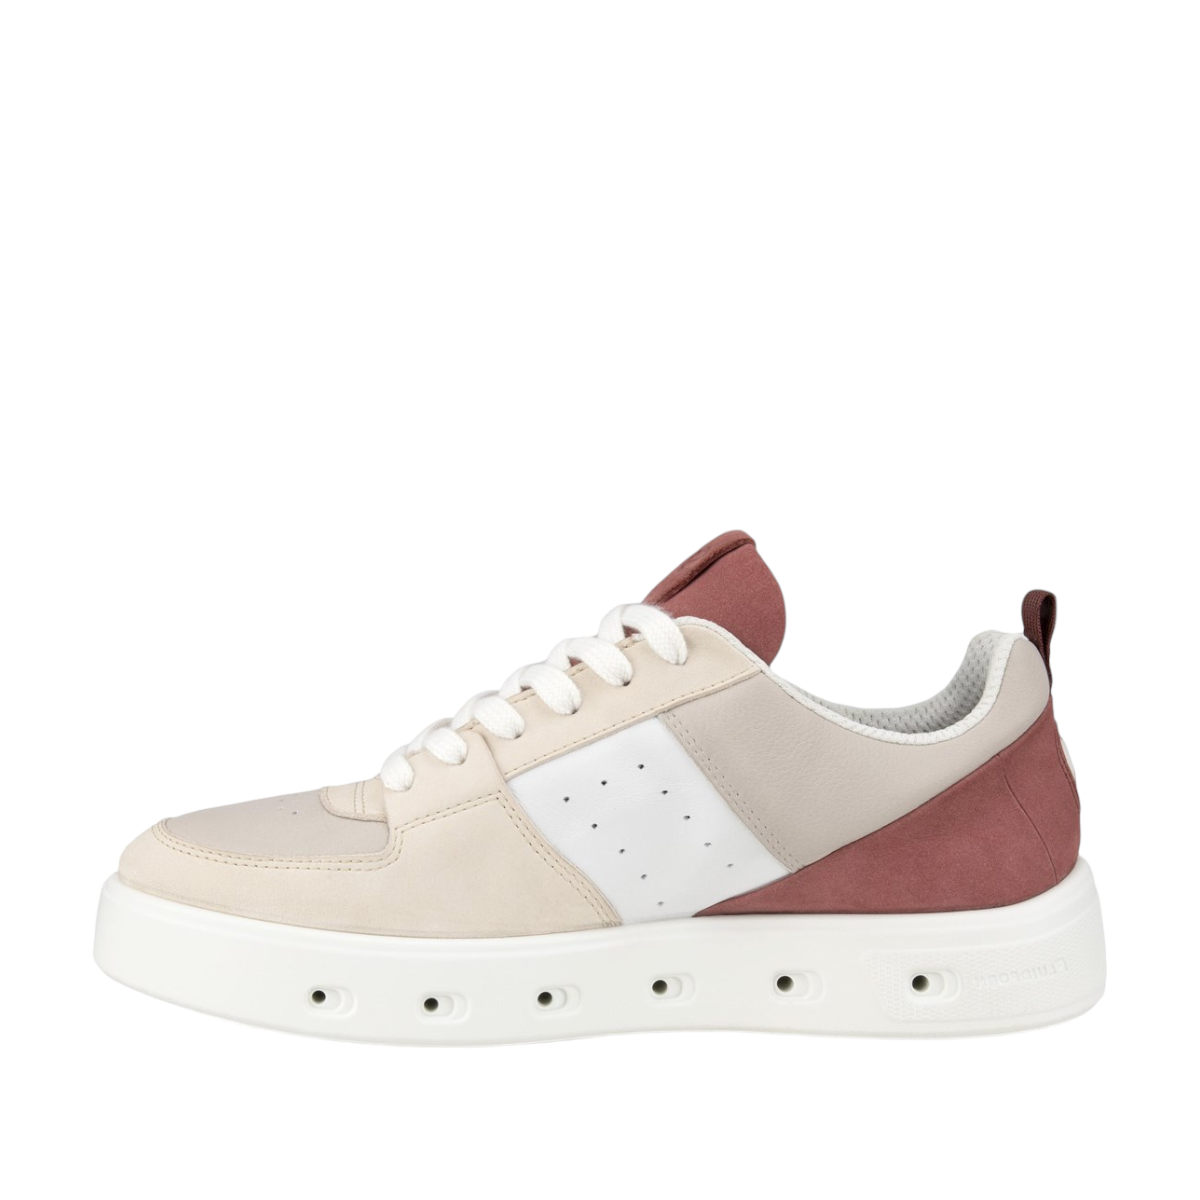 Shop Street 720 W - with shoe&amp;me - from Ecco - Sneakers - Sneakers, Winter, Womens